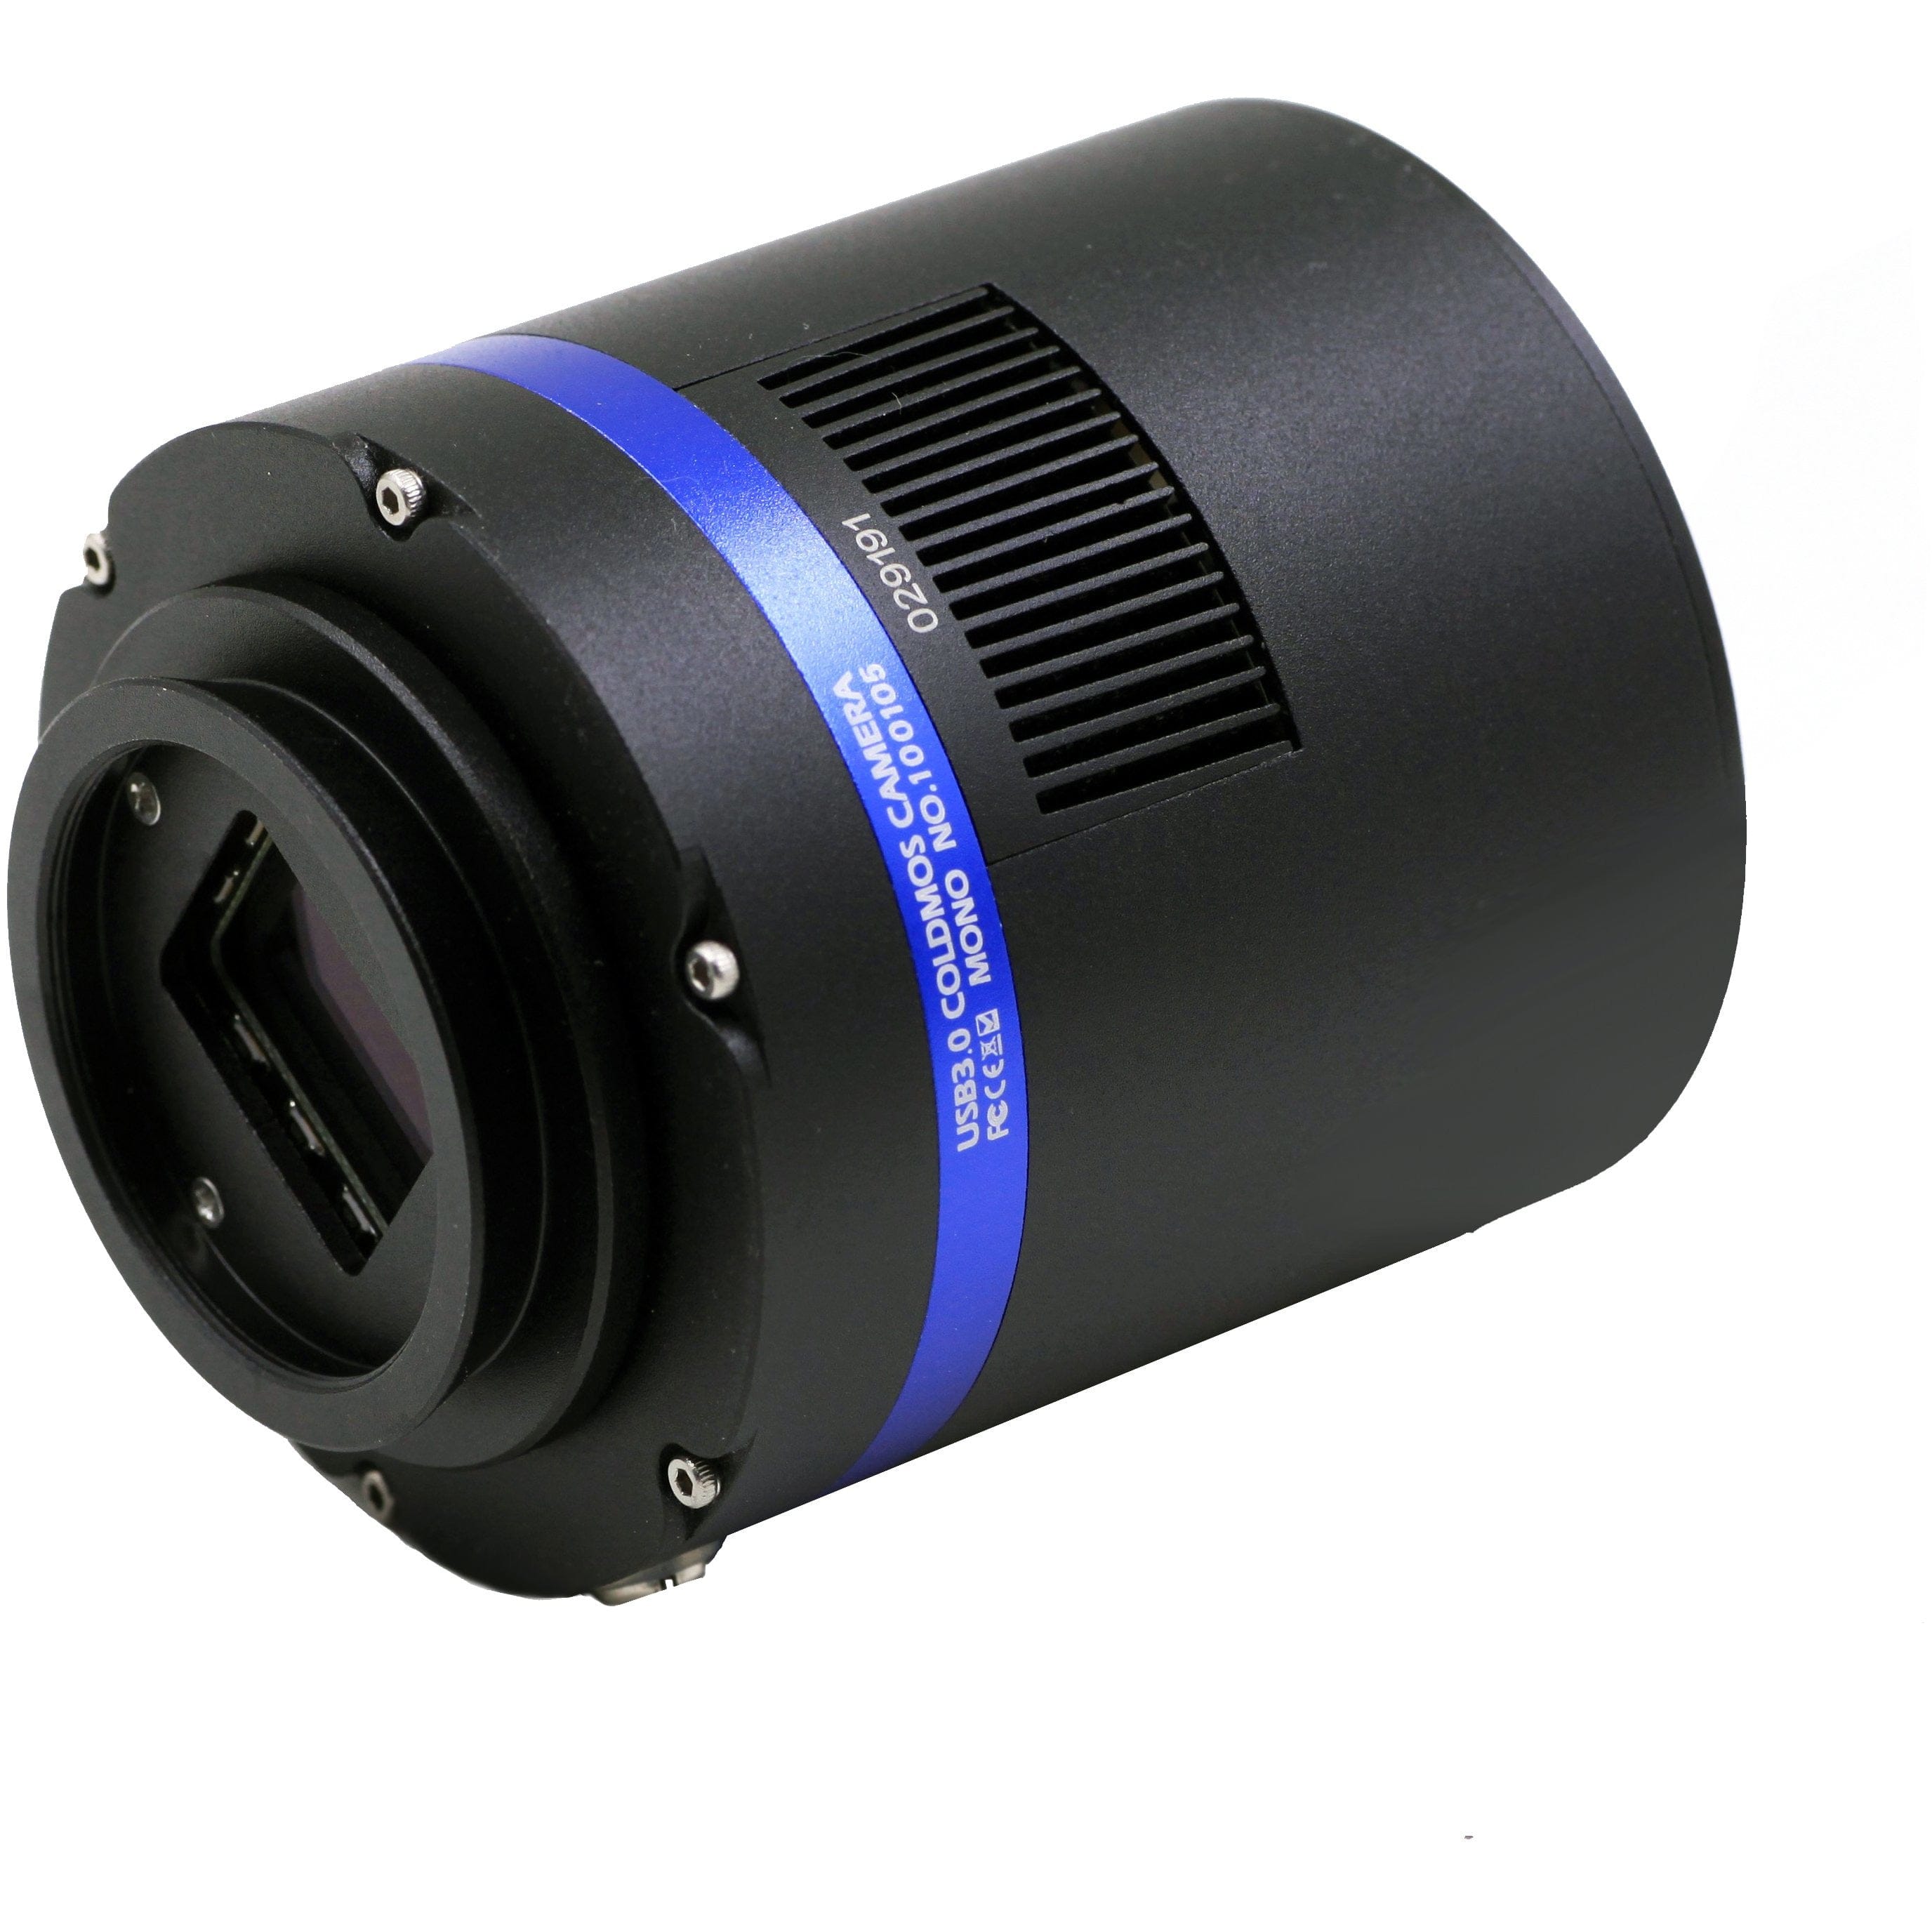 QHYCCD Camera QHYCCD QHY183M Cooled Monochrome CMOS Telescope Astrophotography Camera